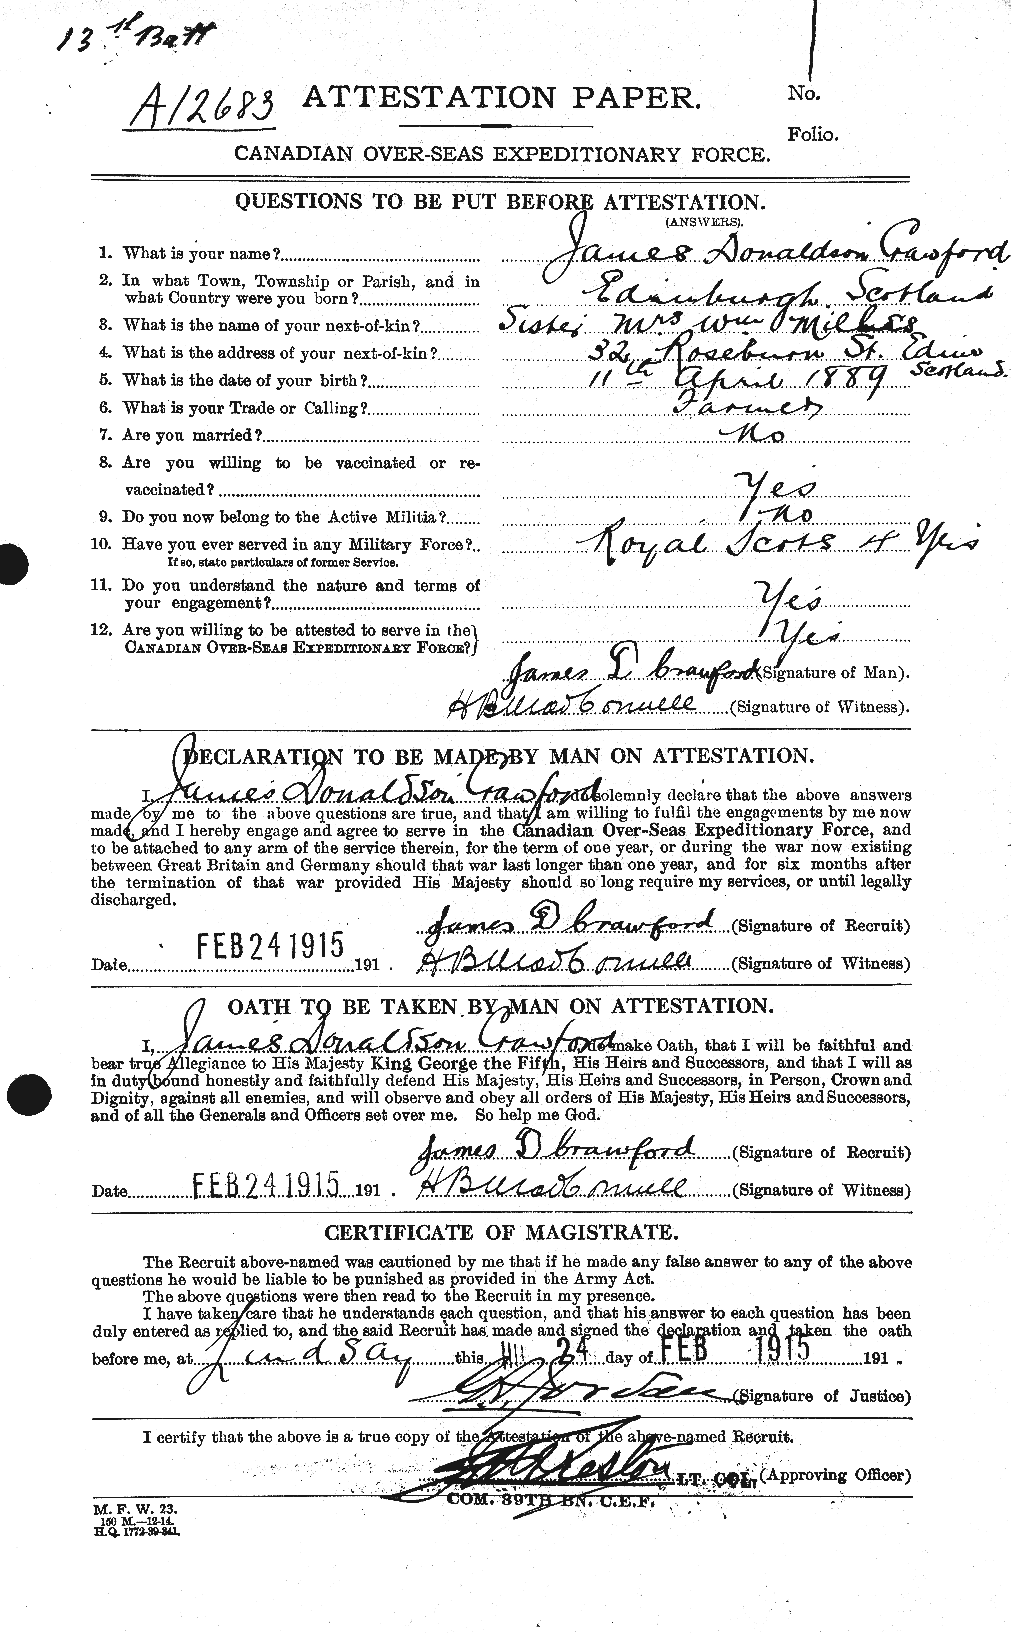 Personnel Records of the First World War - CEF 062755a